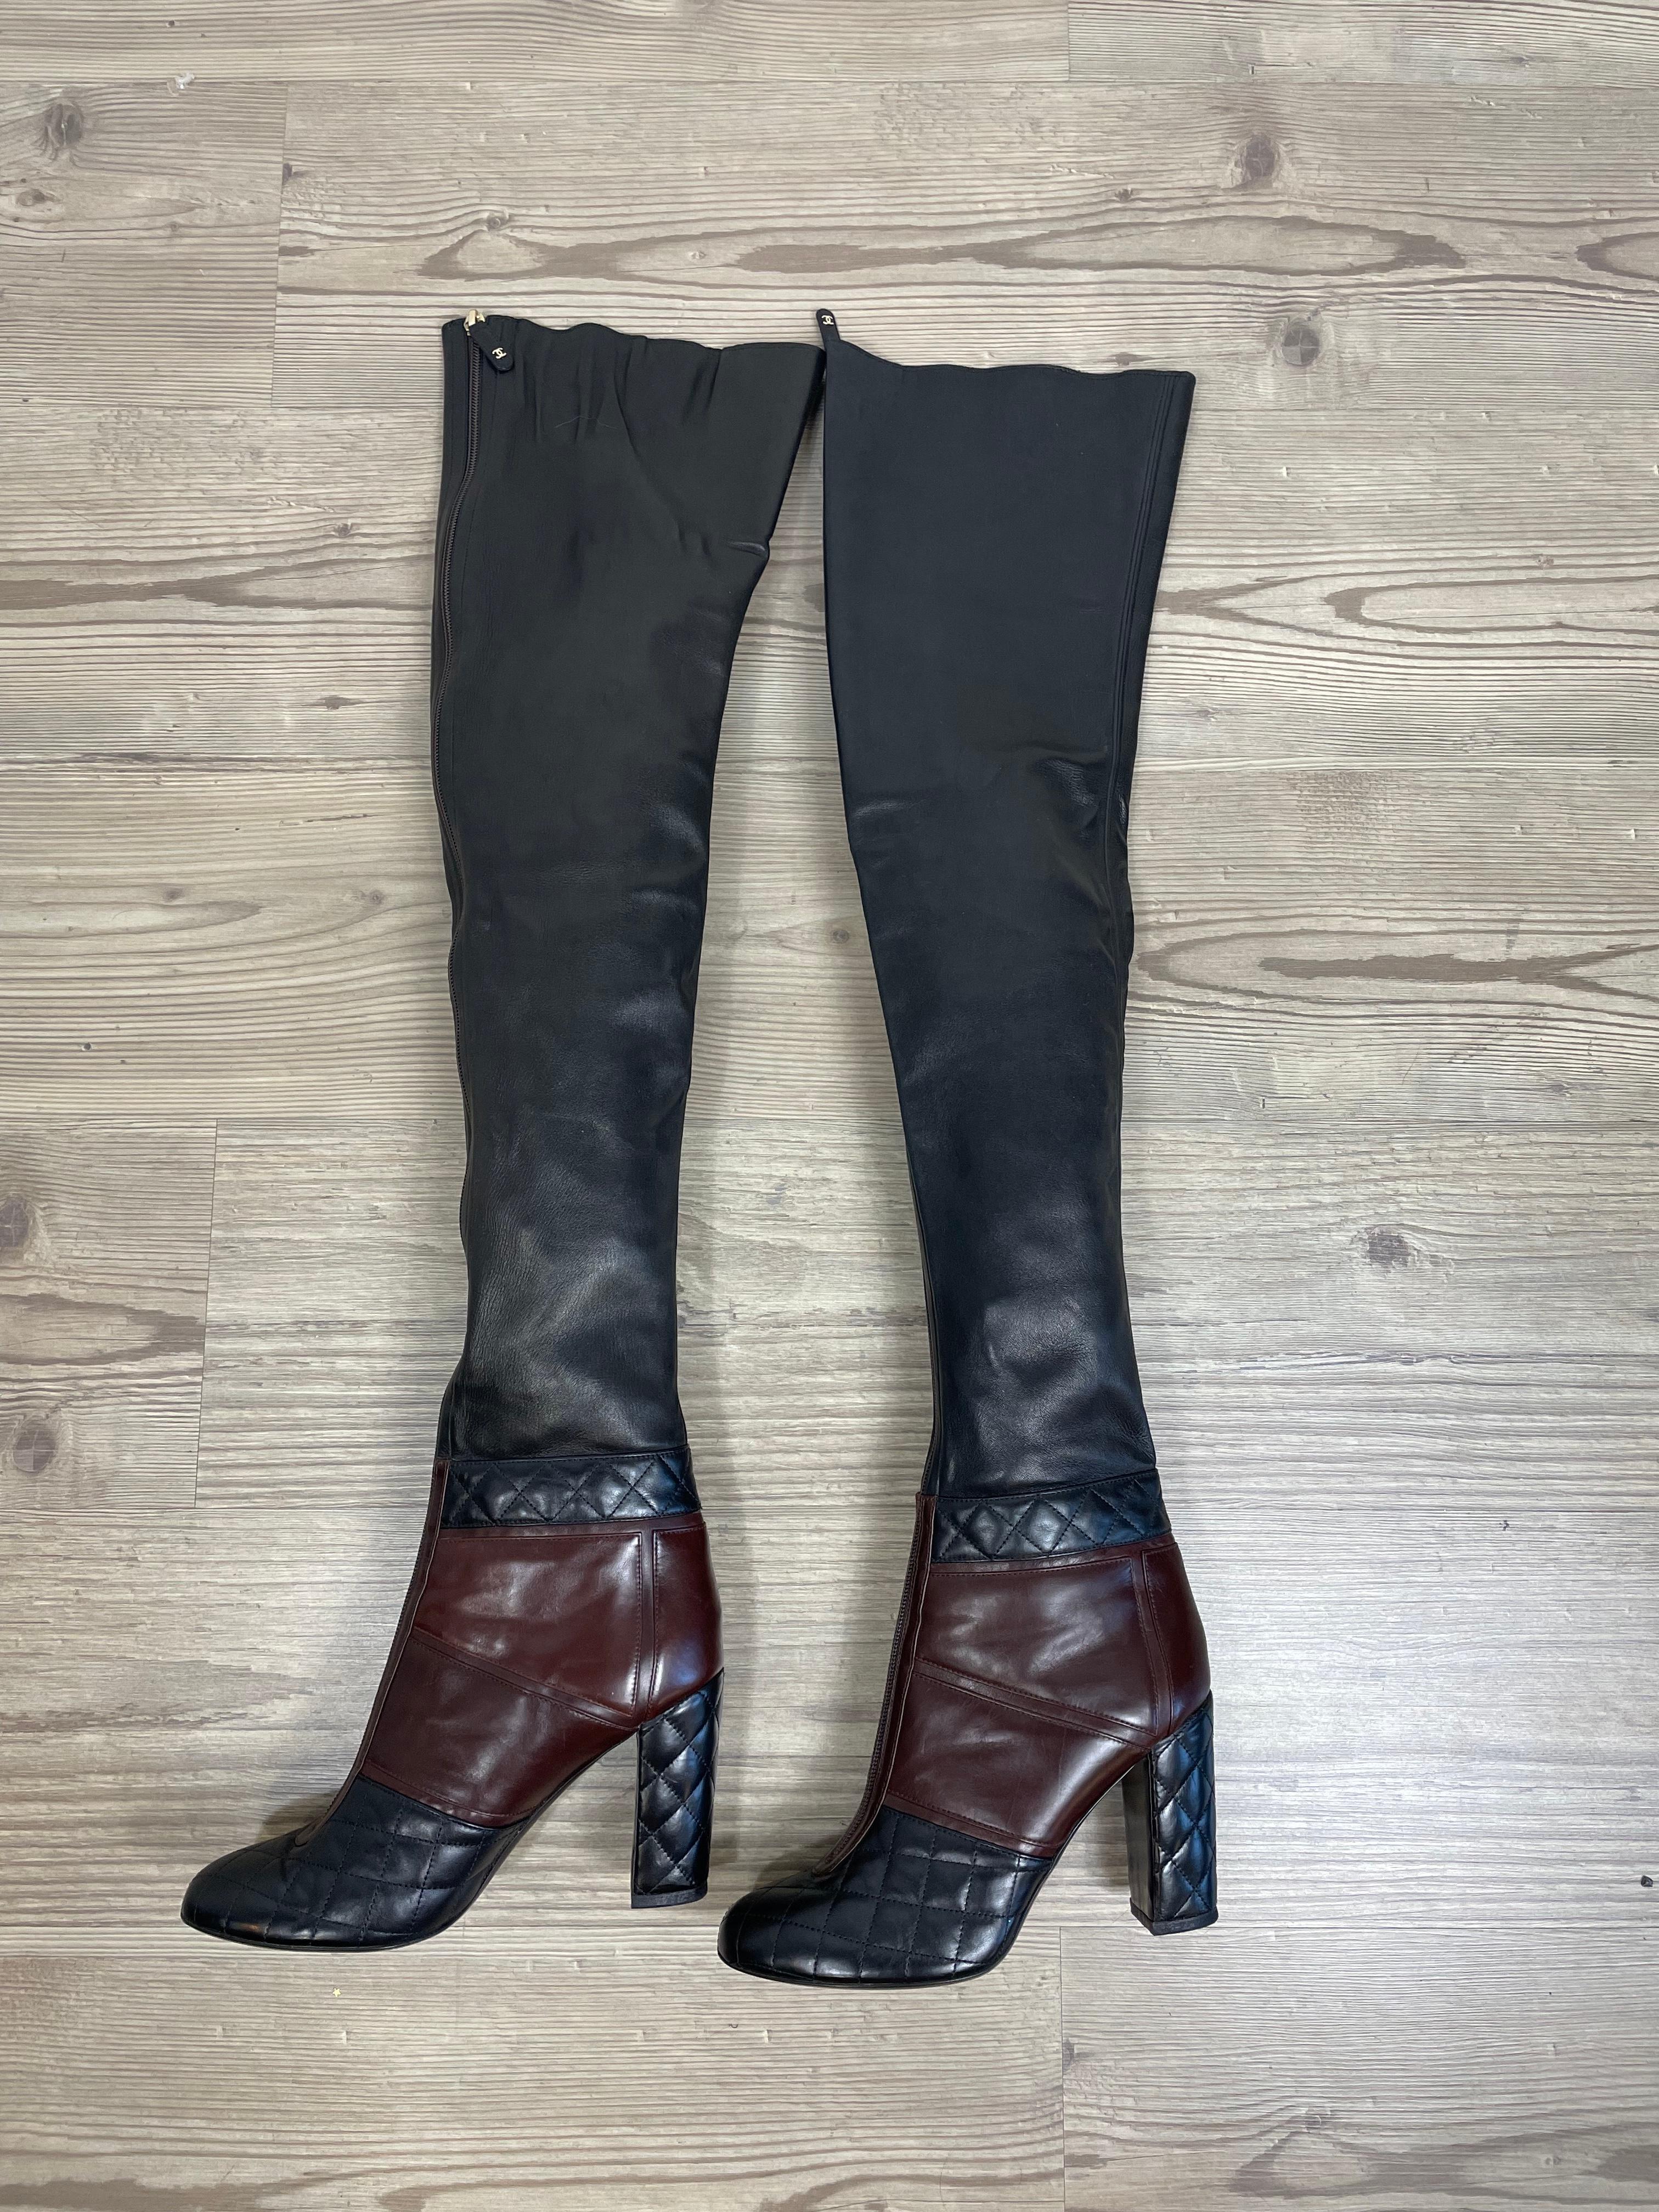 Chanel boots.
Black and brown leather.
Featuring a frontal zip.
Size 41 Italian.
Heels: 10 cm
Total Length: 60 cm
Leg width : 20 cm
It comes with original box.
Conditions: Excellent - Previously owned, lightly worn, with little signs of use.
Leather